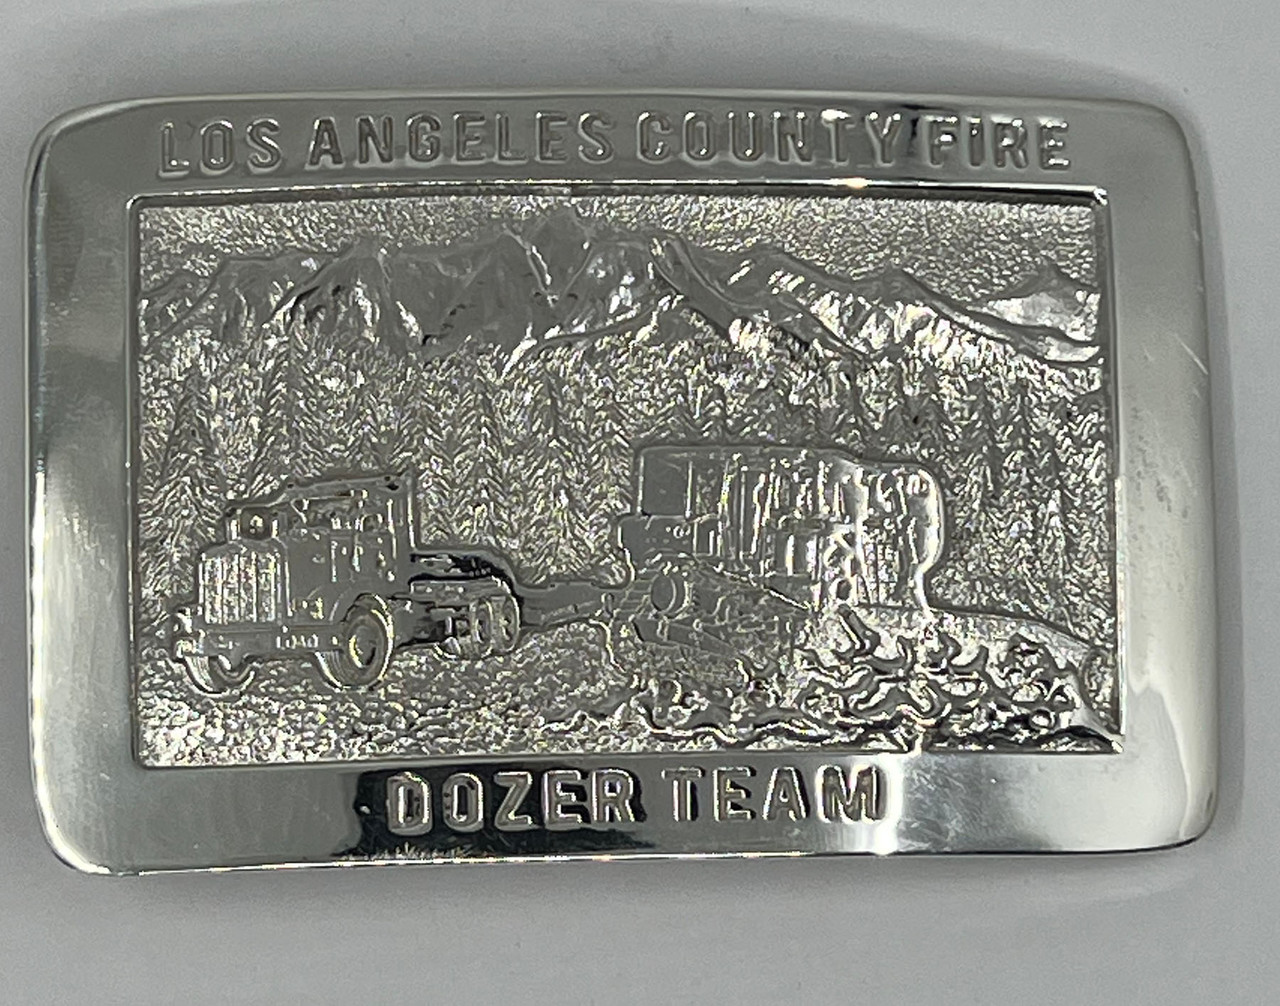 Los Angeles County Fire Dozer Team Buckle (RESTRICTED)